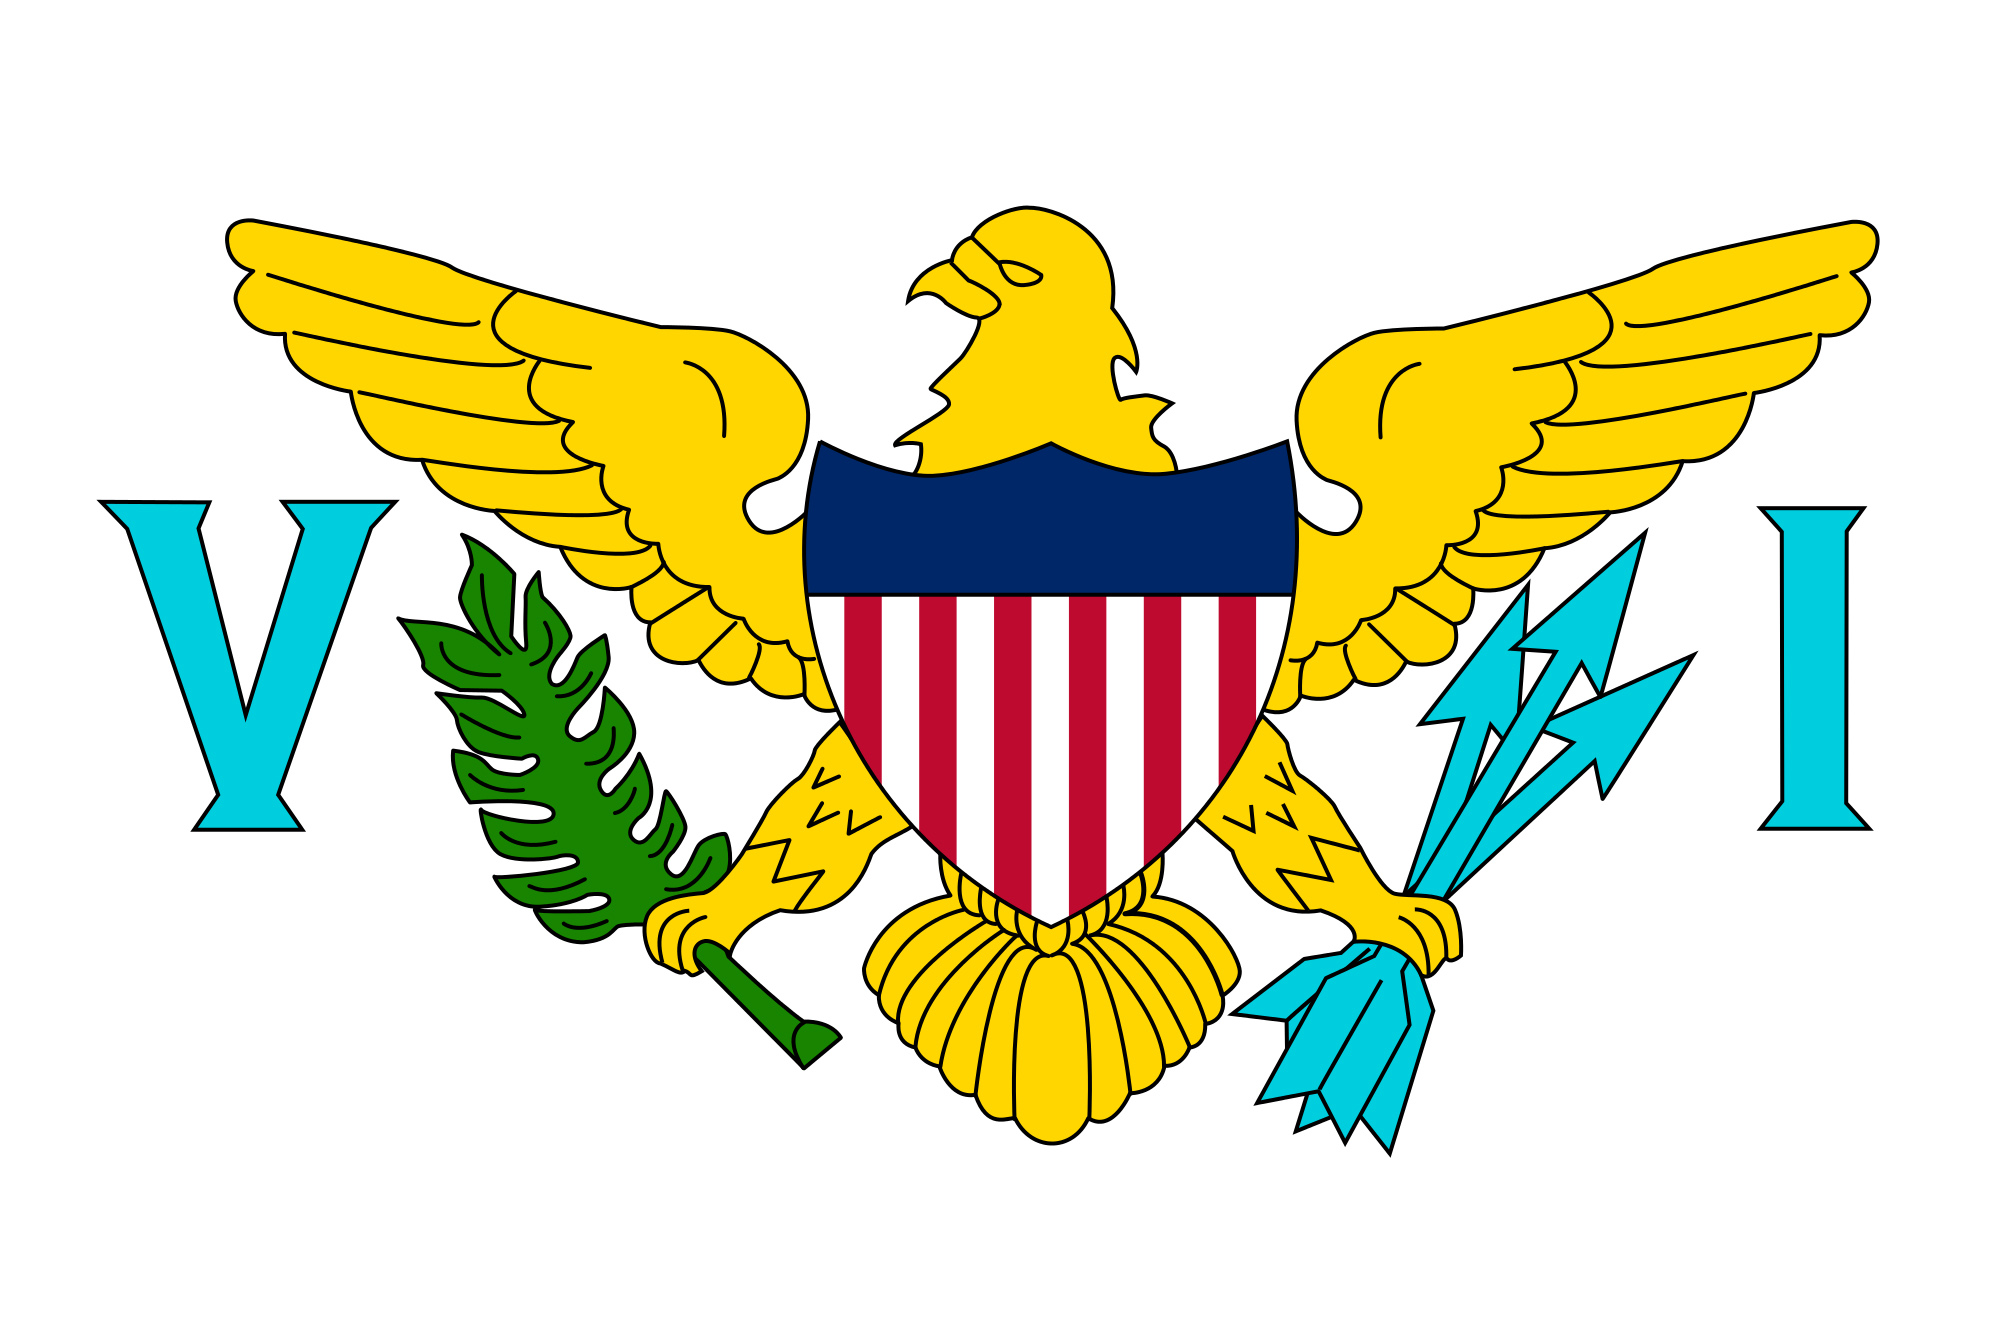 Flag of the United States Virgin Islands